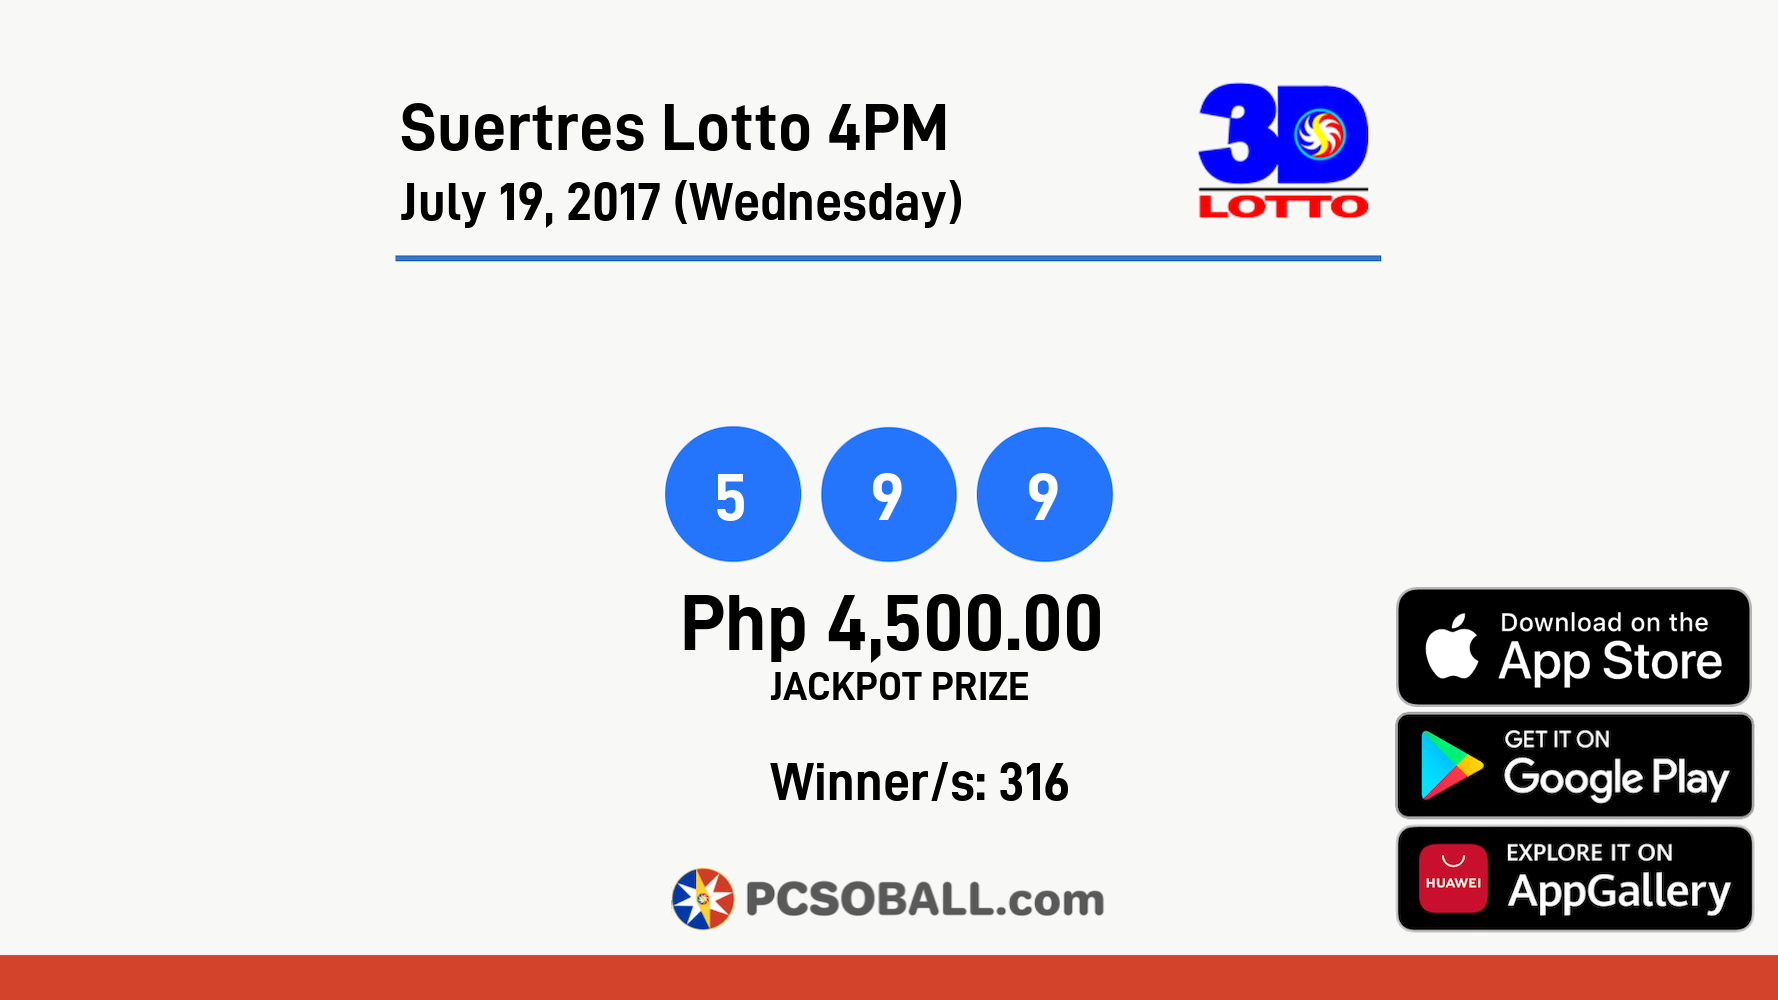 Suertres Lotto 4PM July 19, 2017 (Wednesday) Result